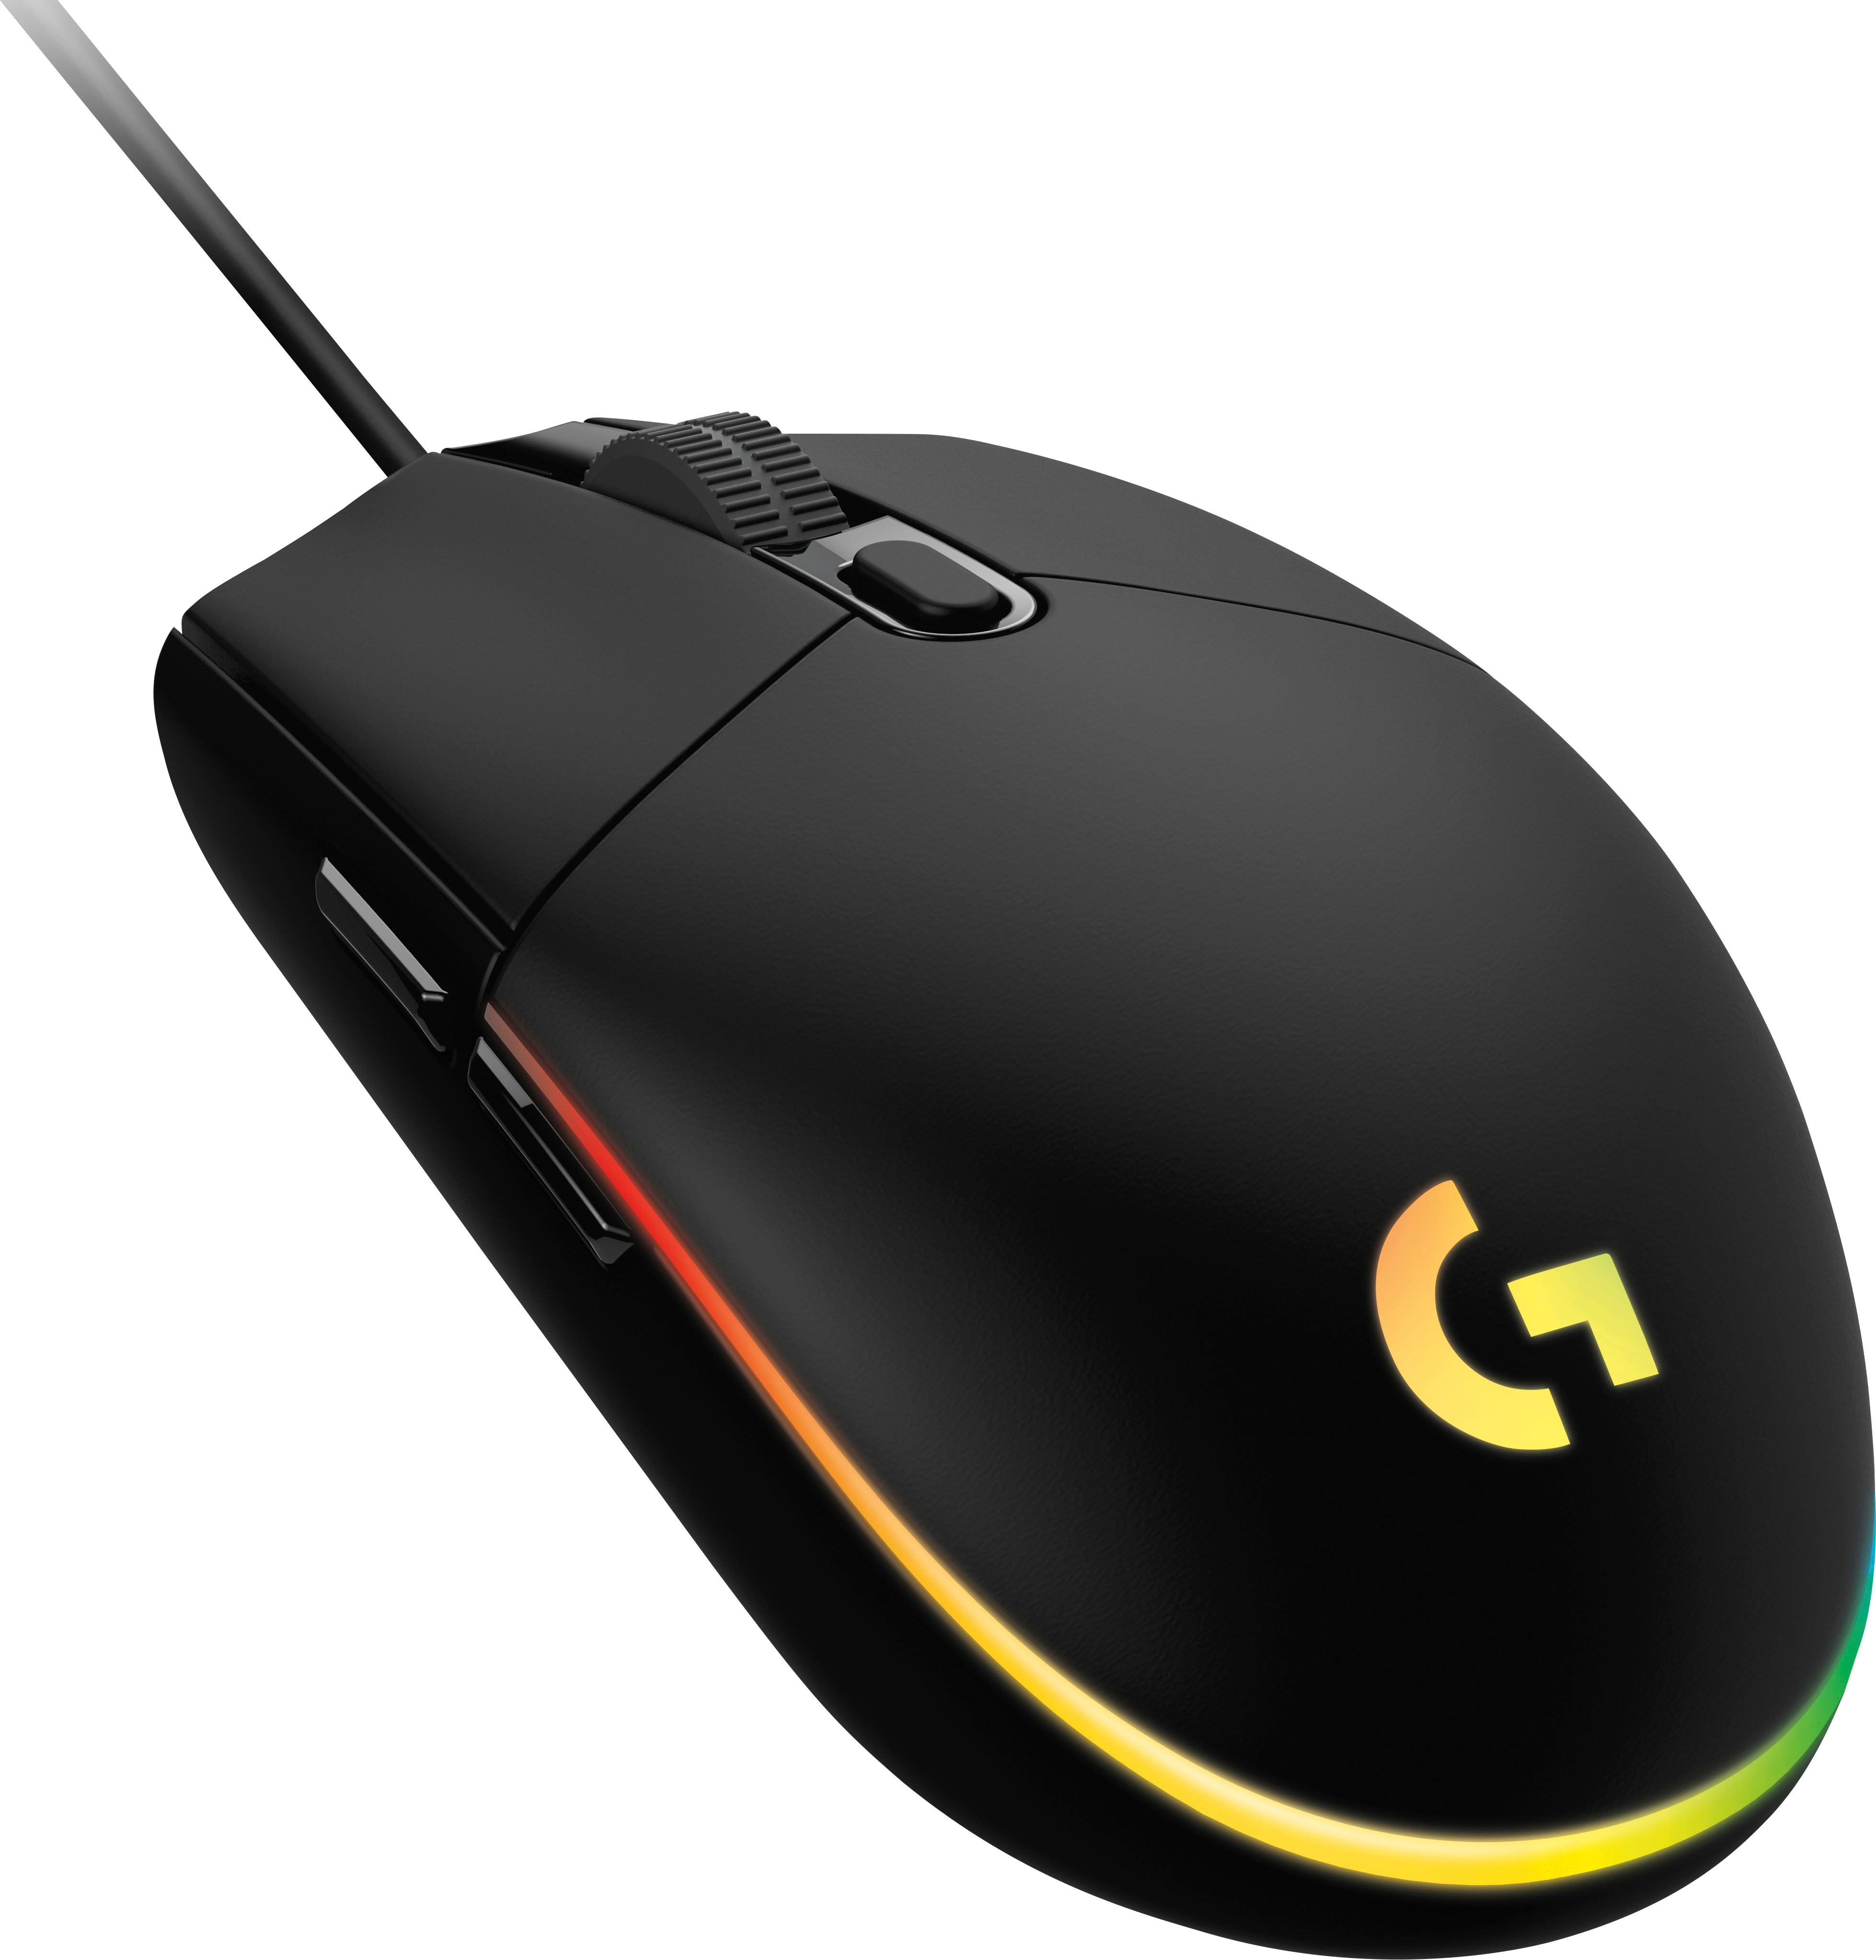 Logitech G203 LIGHTSYNC Wired Optical Gaming Mouse with DPI sensor 910-005790 - Best Buy